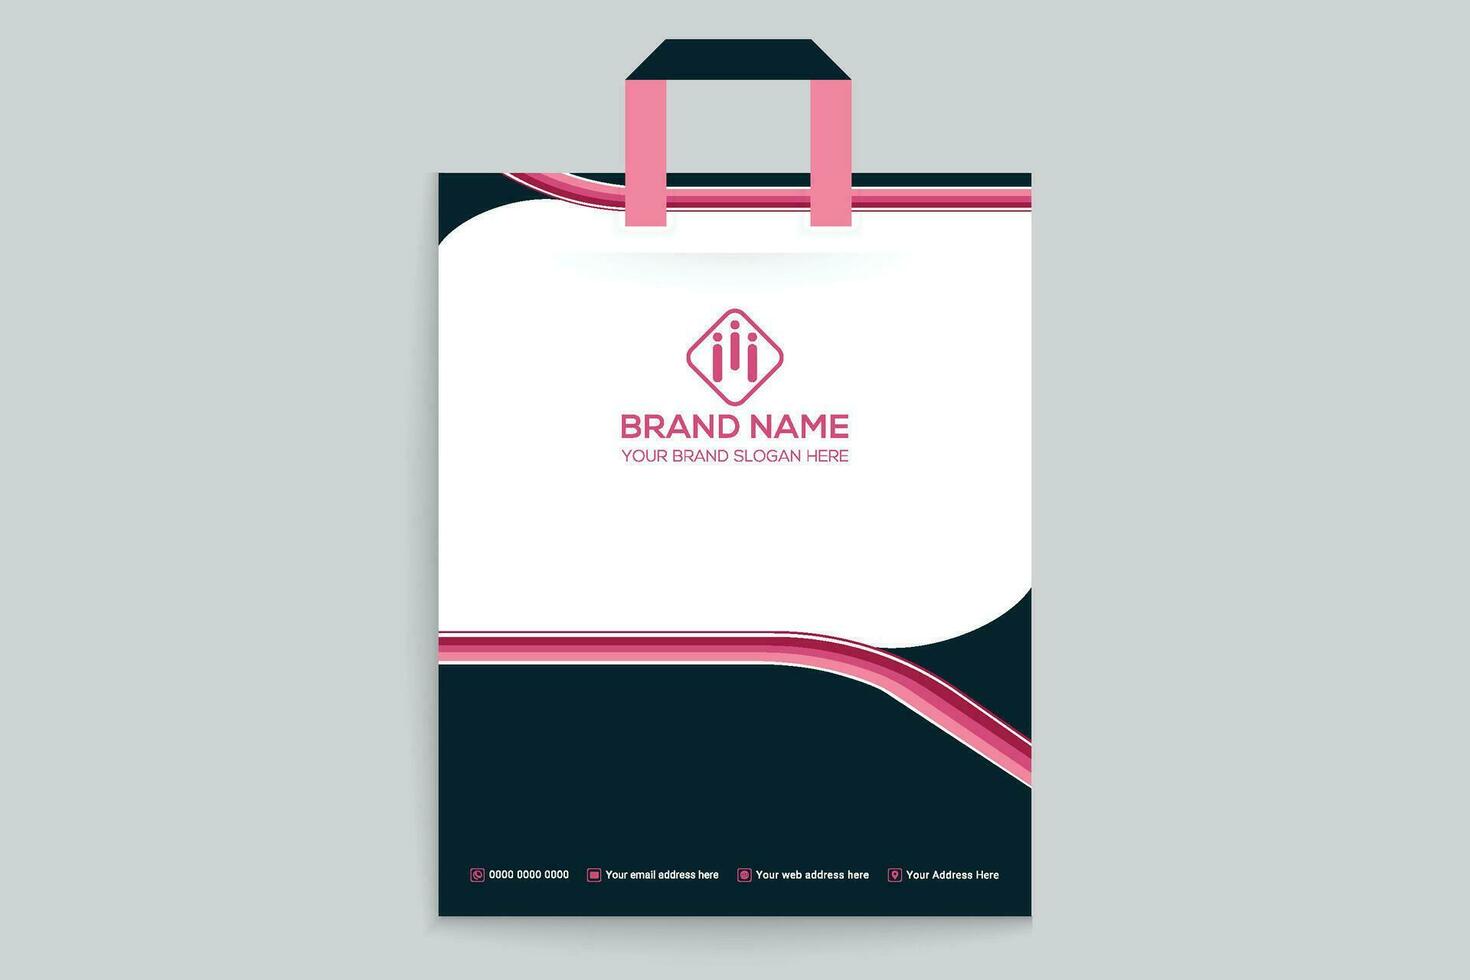 Corporate shopping bag template vector